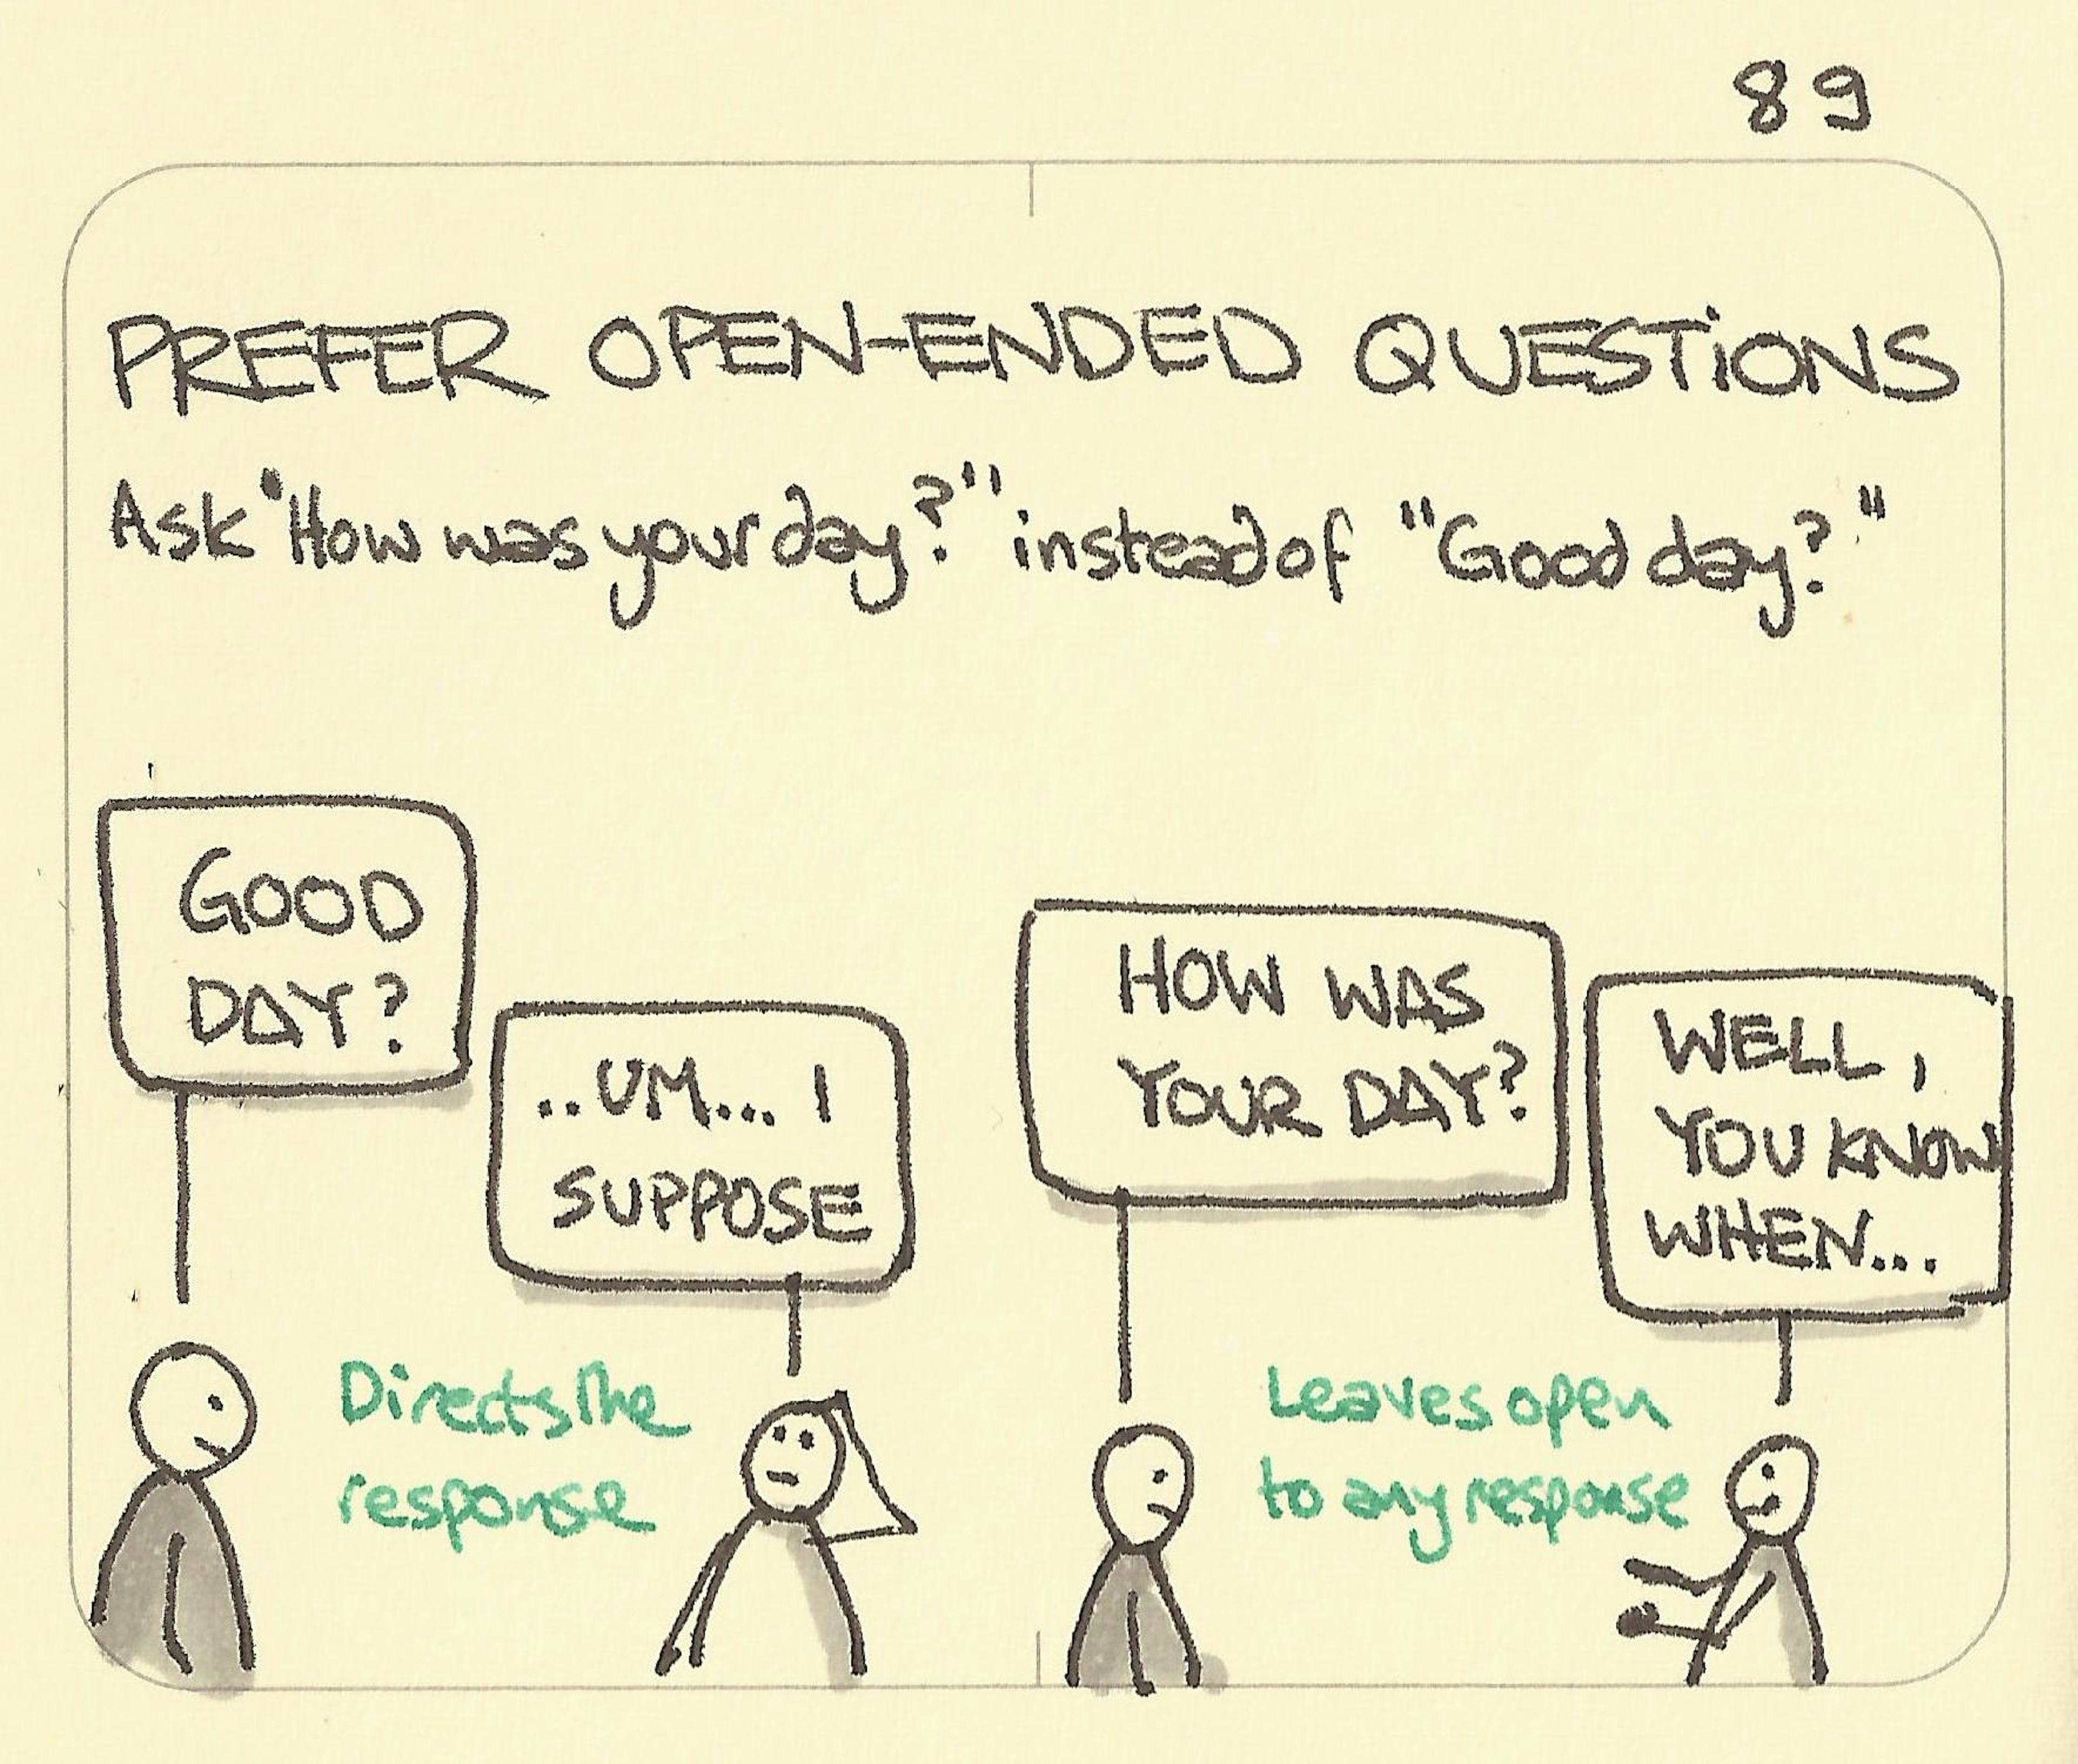 Someone gets a much better response by asking 'How was your day?' instead of 'Good day?'